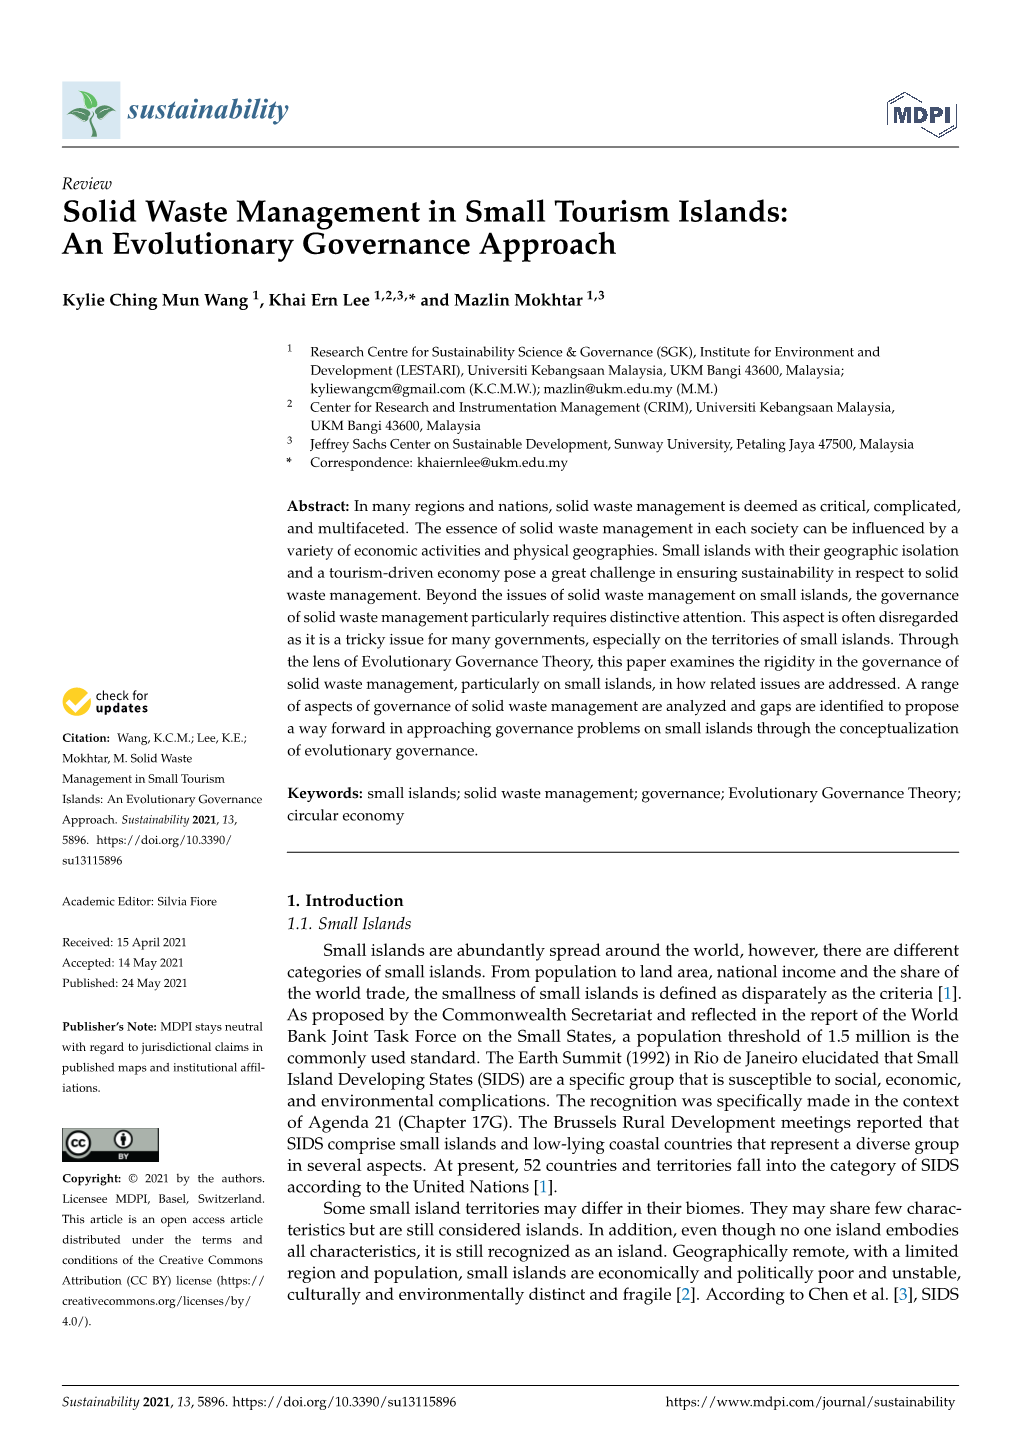 Solid Waste Management in Small Tourism Islands: an Evolutionary Governance Approach